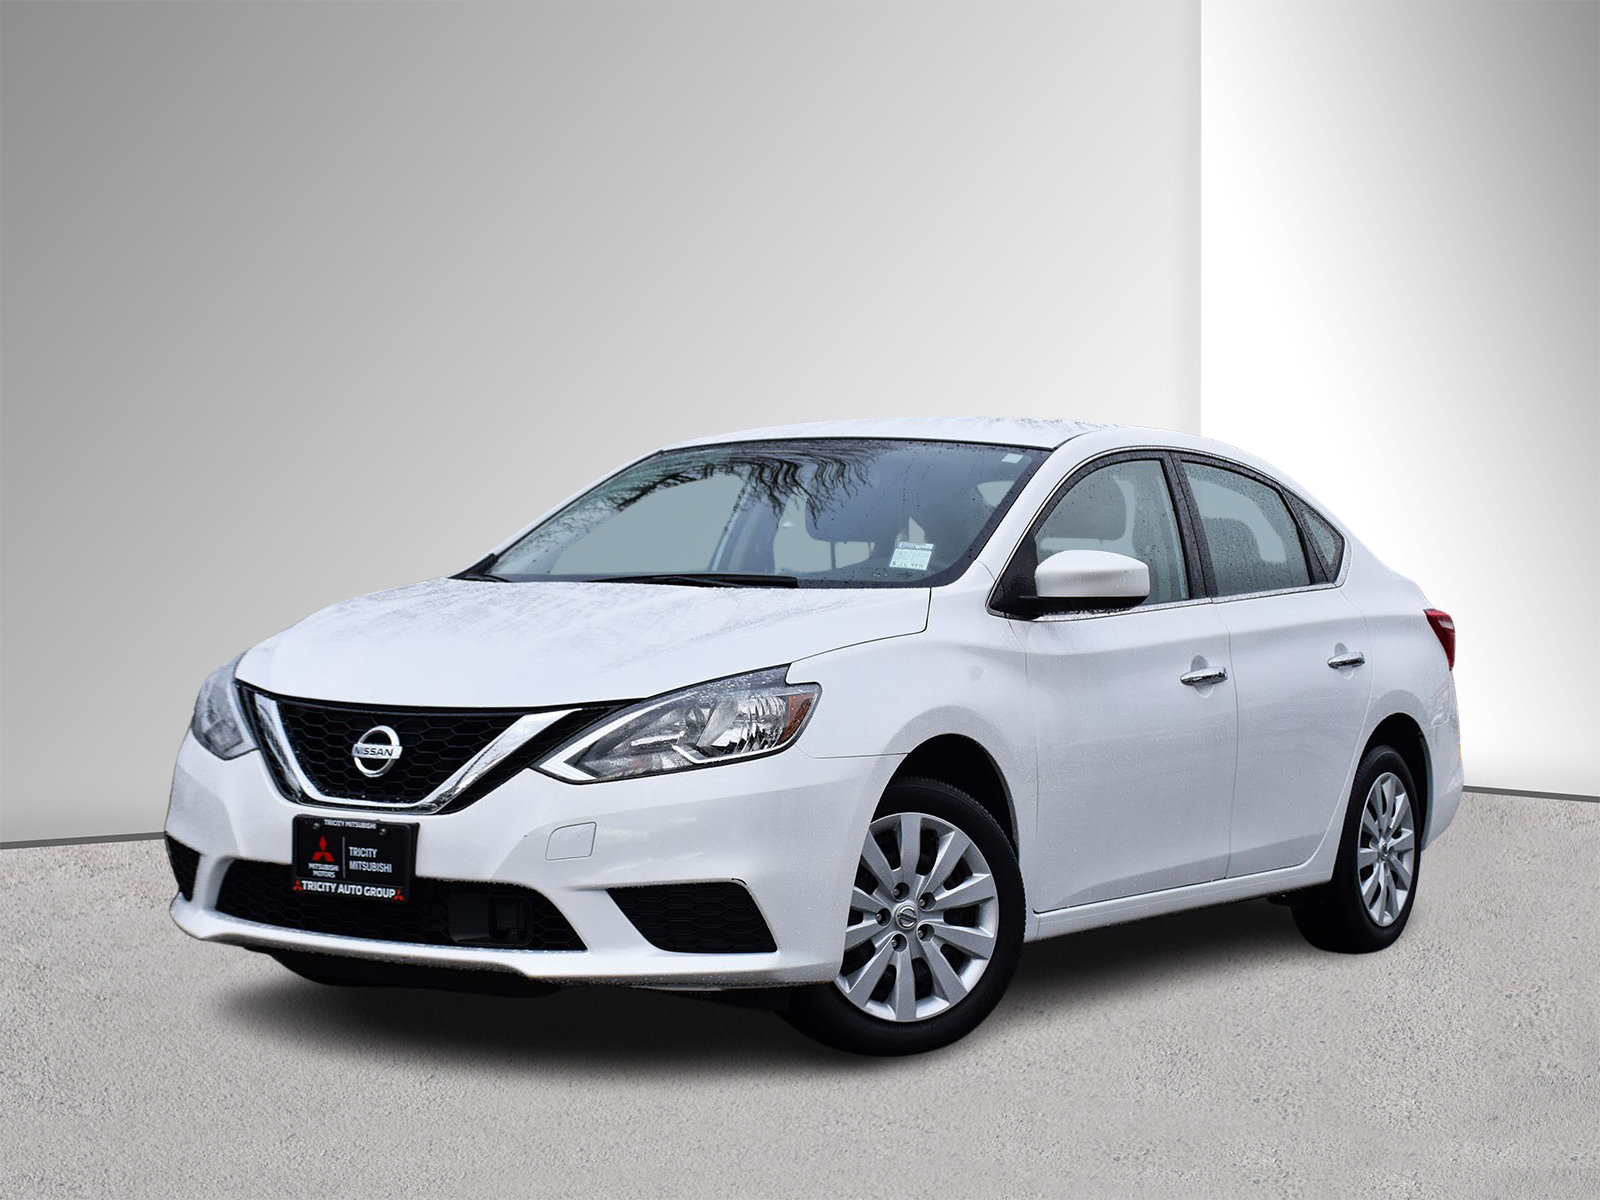 2019 Nissan Sentra SV - No Accidents, One Owner, Heated Seats